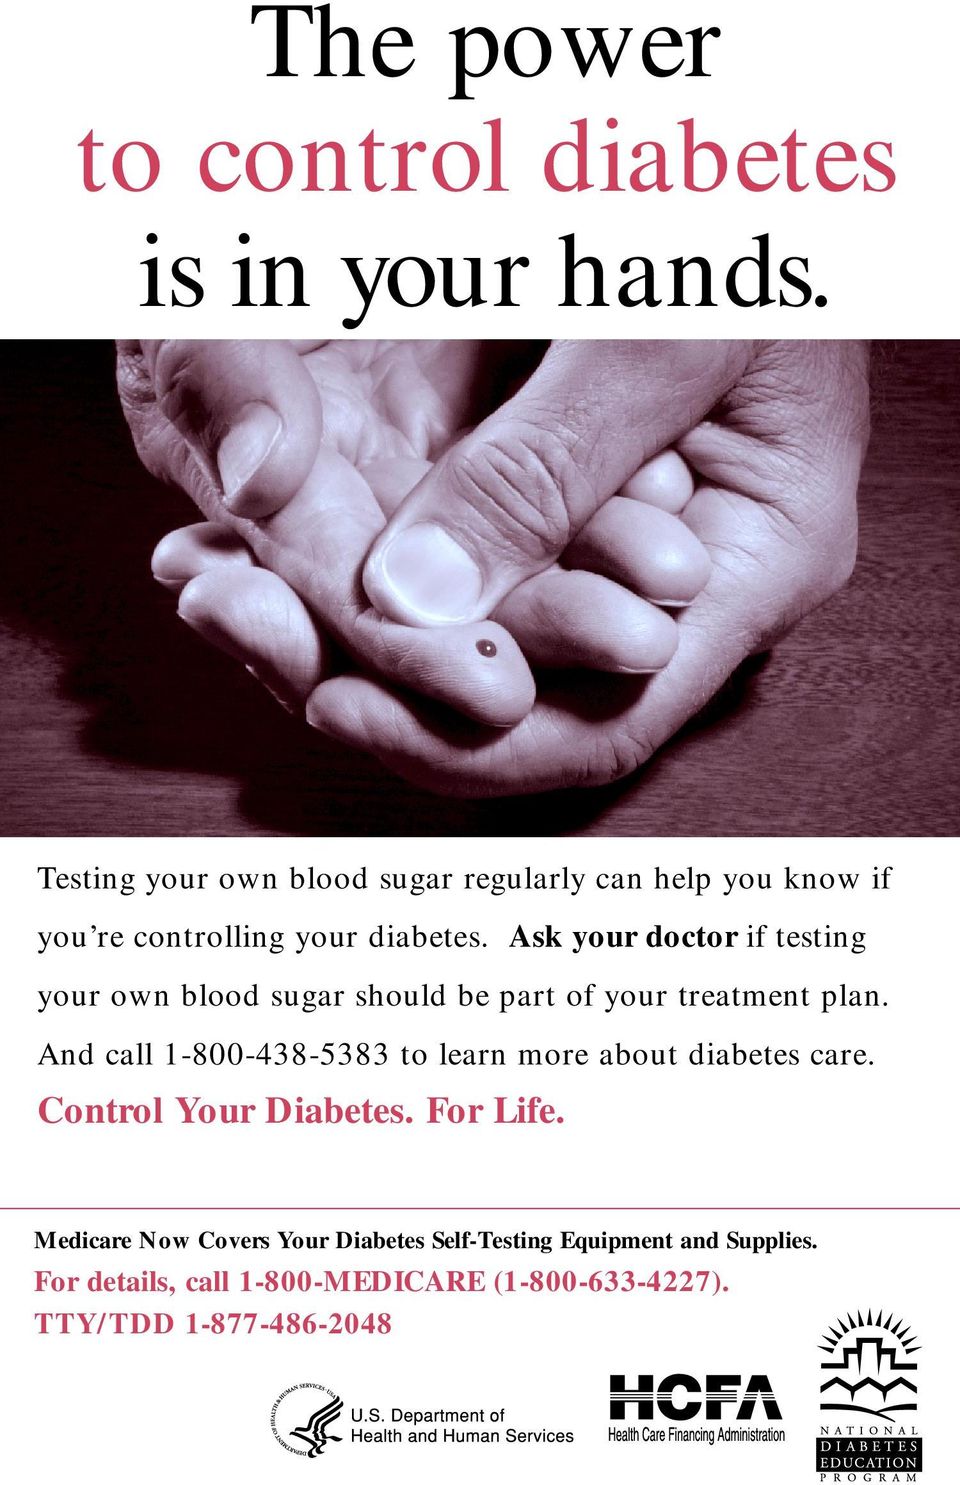 Ask your doctor if testing your own blood sugar should be part of your treatment plan.